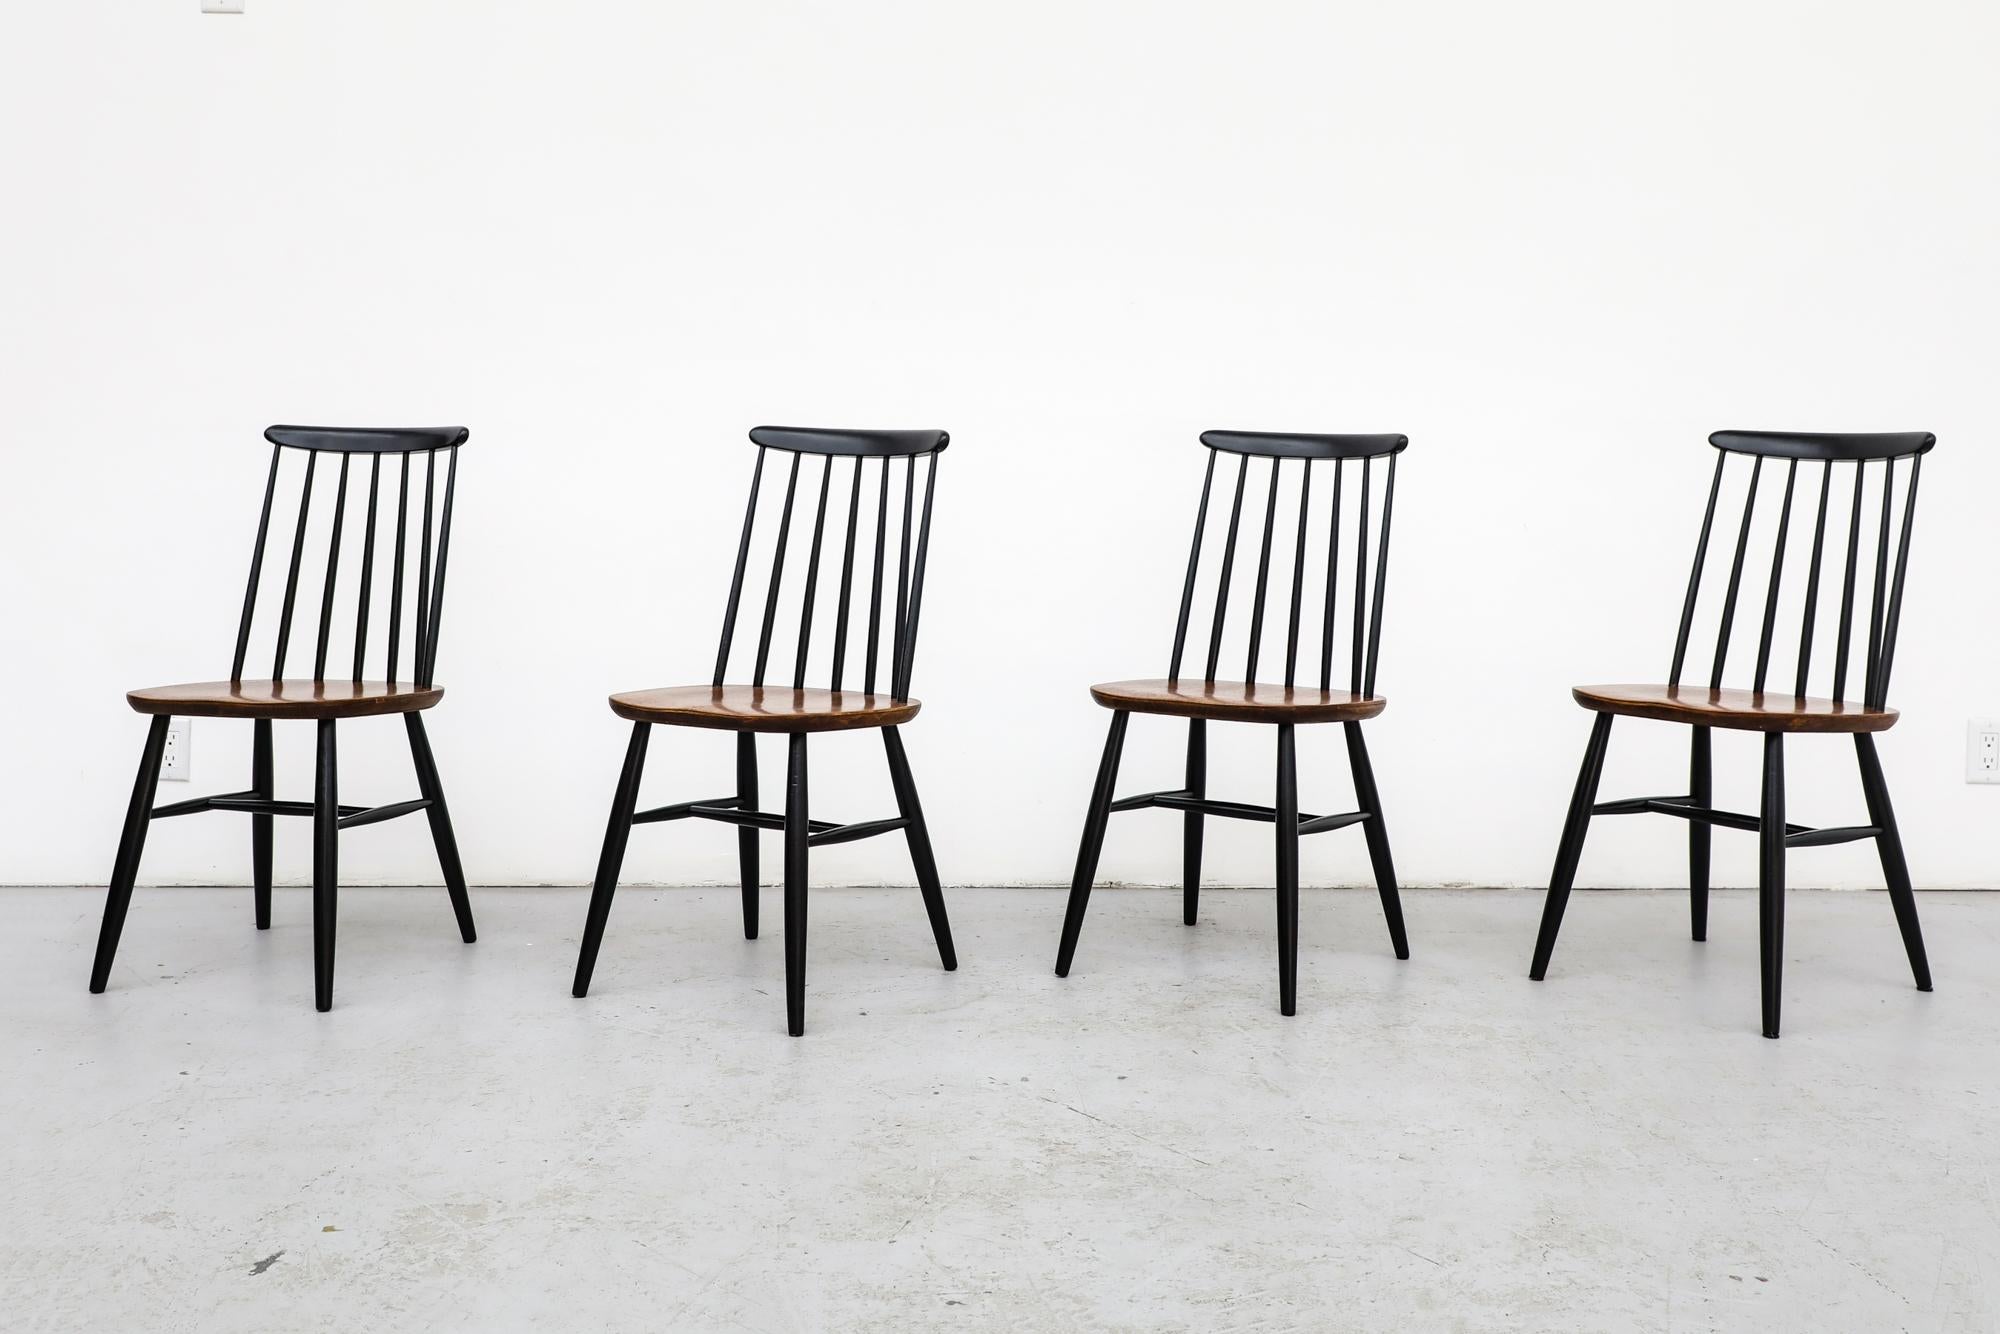 Set of 4 vintage Ilmari Tapiovaara inspired spindle back dining chairs with teak seats and black stained back and legs by Thomas Harlev for Farstrup. These chairs are in original condition with visible wear, consistent with their age and use. Other